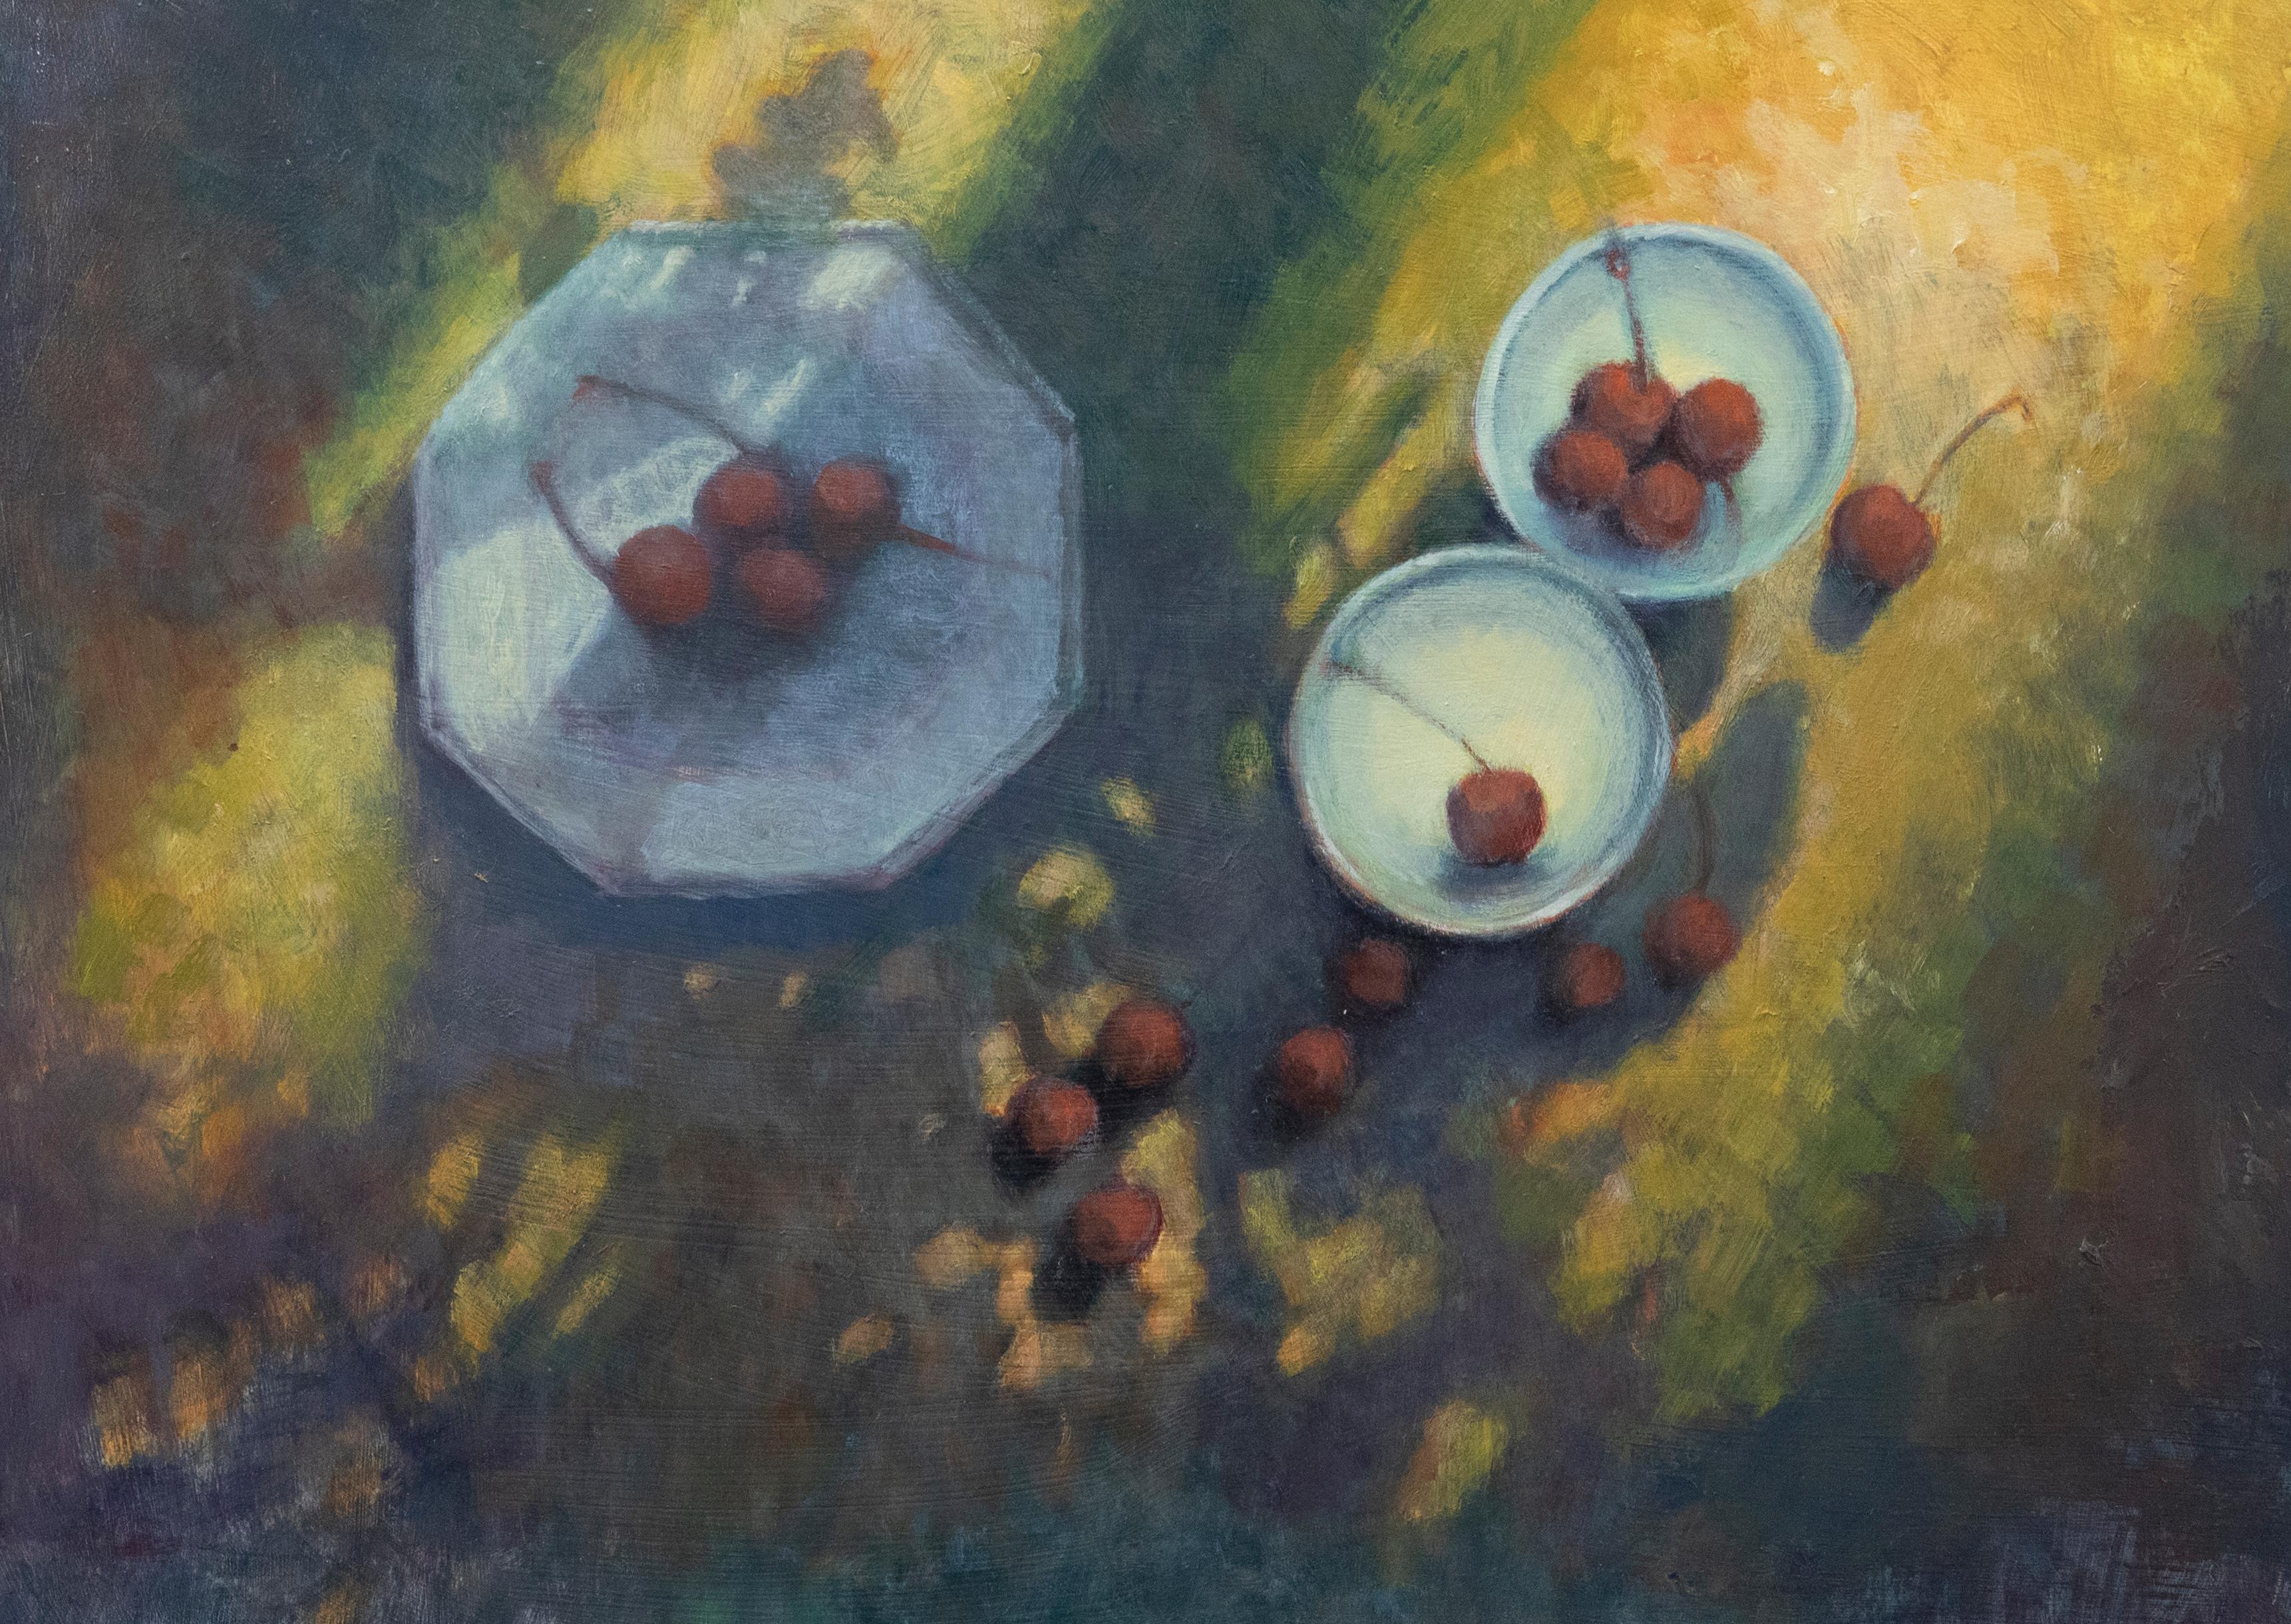 A charming still life study depicting three bowls of cherries sitting in dappled sunlight. the artist captures the scene in in soft brush strokes which give a slight haze to the composition. Unsigned. On board.
